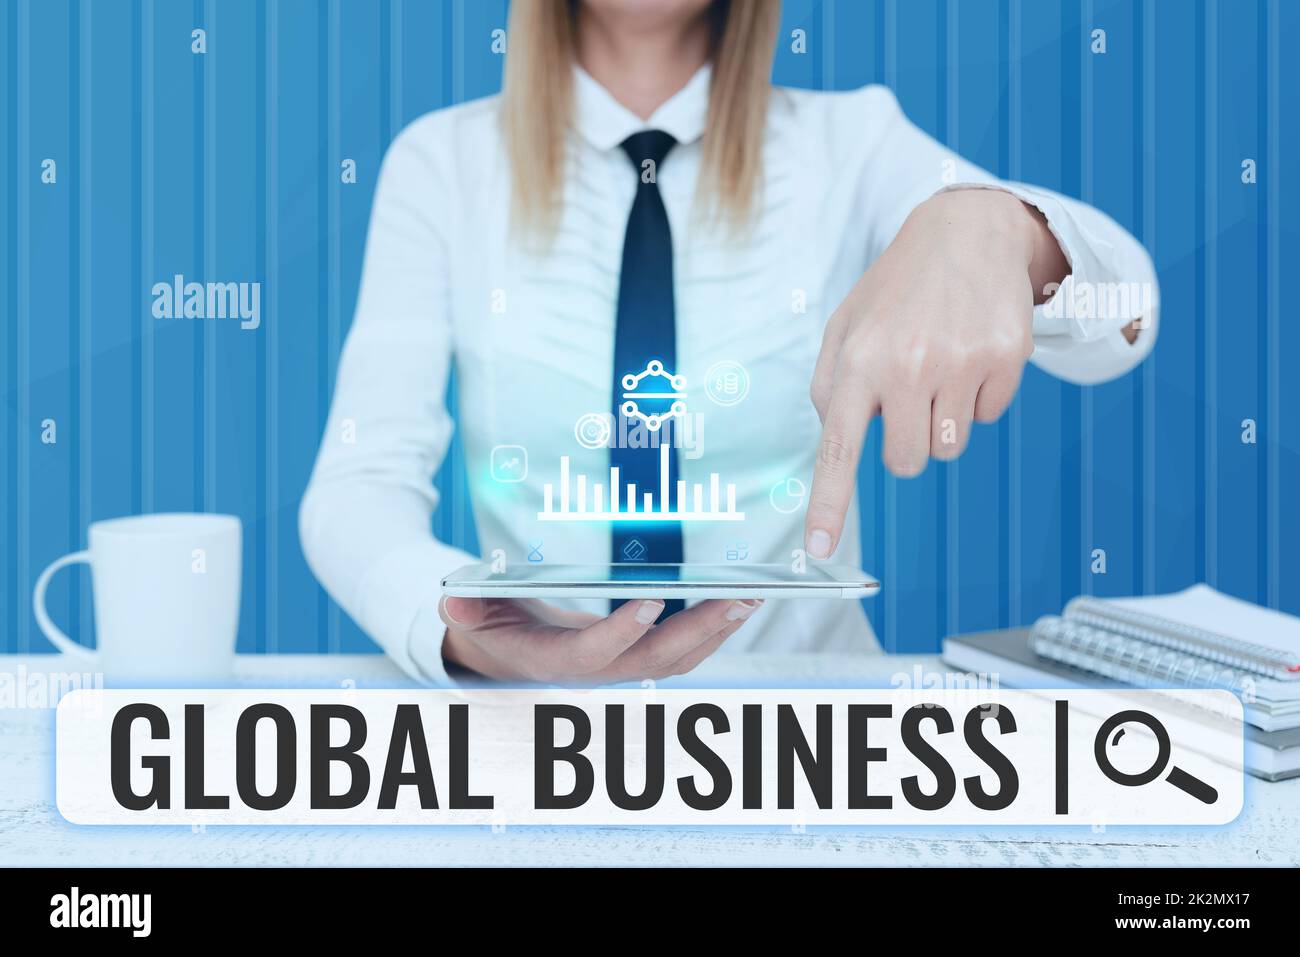 Writing displaying text Global Business. Business approach Trade and business system a company doing across the world Lady Pressing Screen Of Mobile Phone Showing The Futuristic Technology Stock Photo